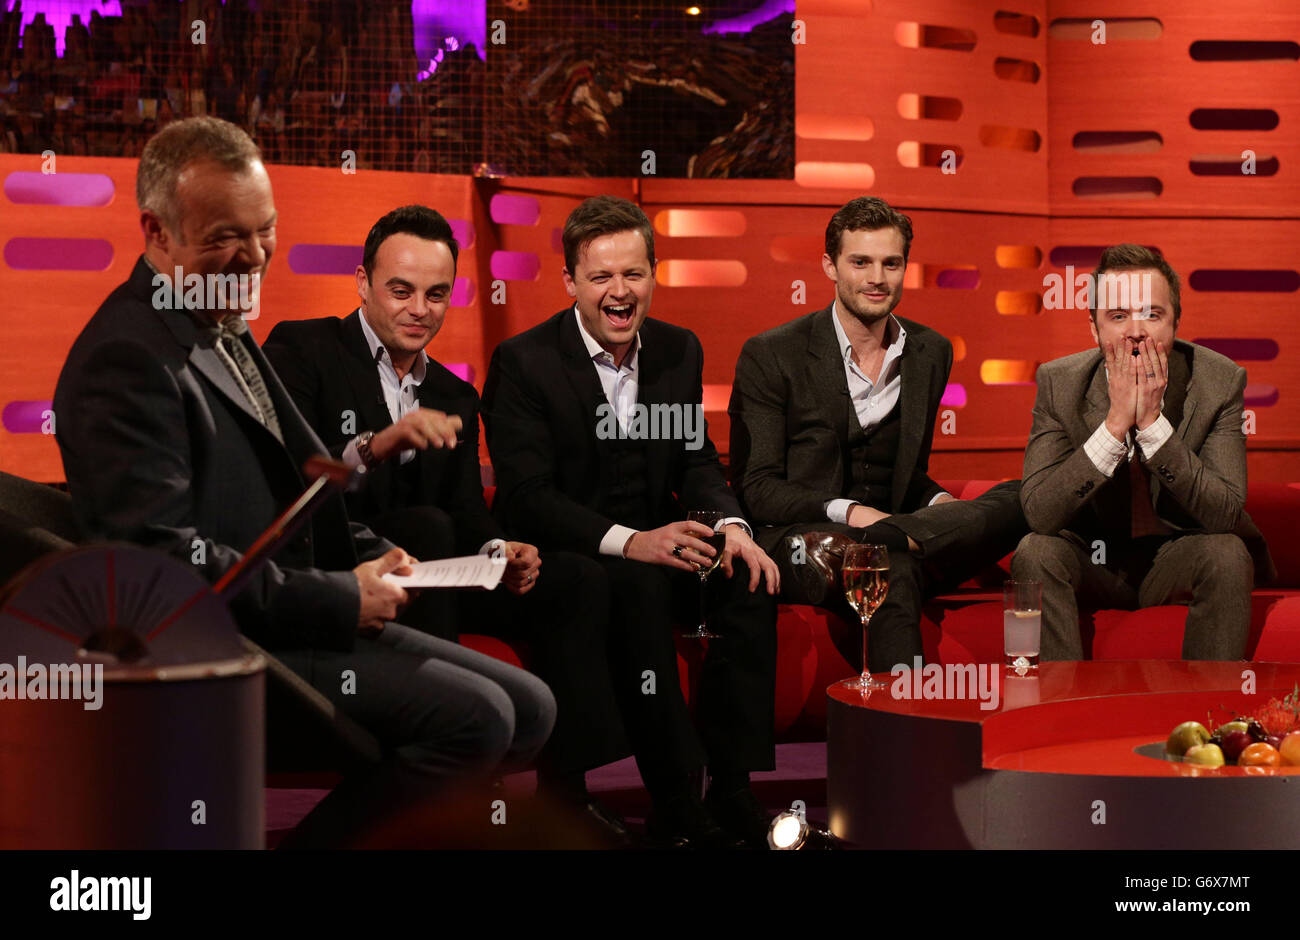 Host Graham Norton (left) with guests (left to right) Anthony McPartlin, Declan Donnelly, Jamie Dornan and Aaron Paul, during the filming of the Graham Norton Show at the London Studios, south London, to be aired on BBC One on Friday evening. Stock Photo